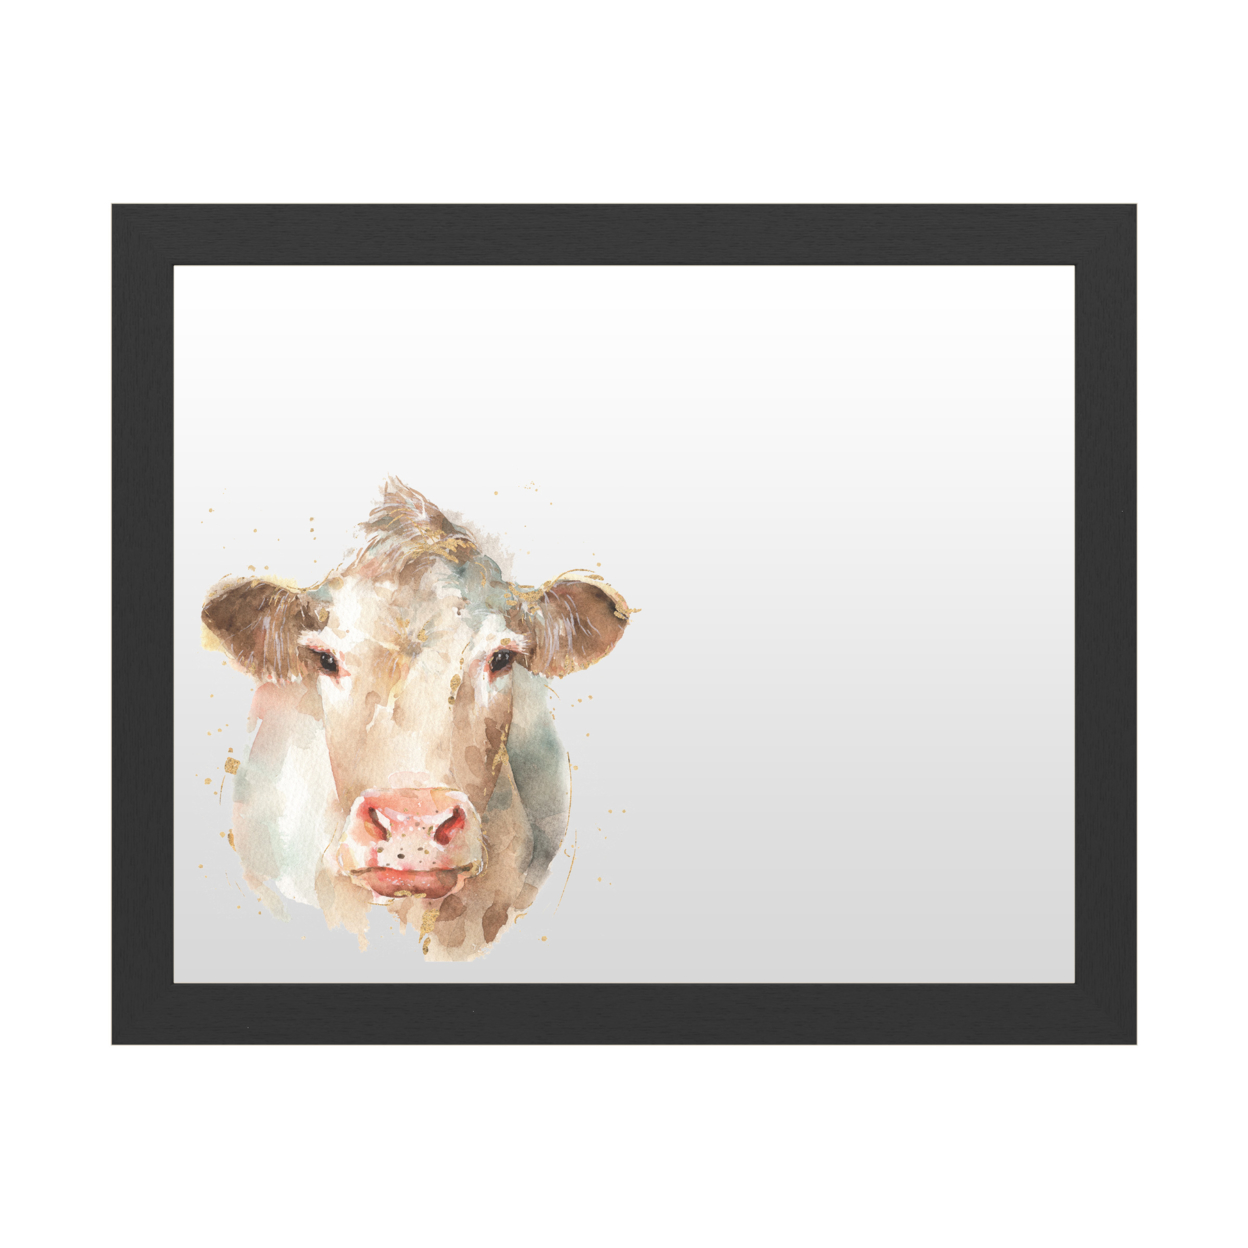 Dry Erase 16 X 20 Marker Board With Printed Artwork - Lisa Audit Farm Friends II White Board - Ready To Hang